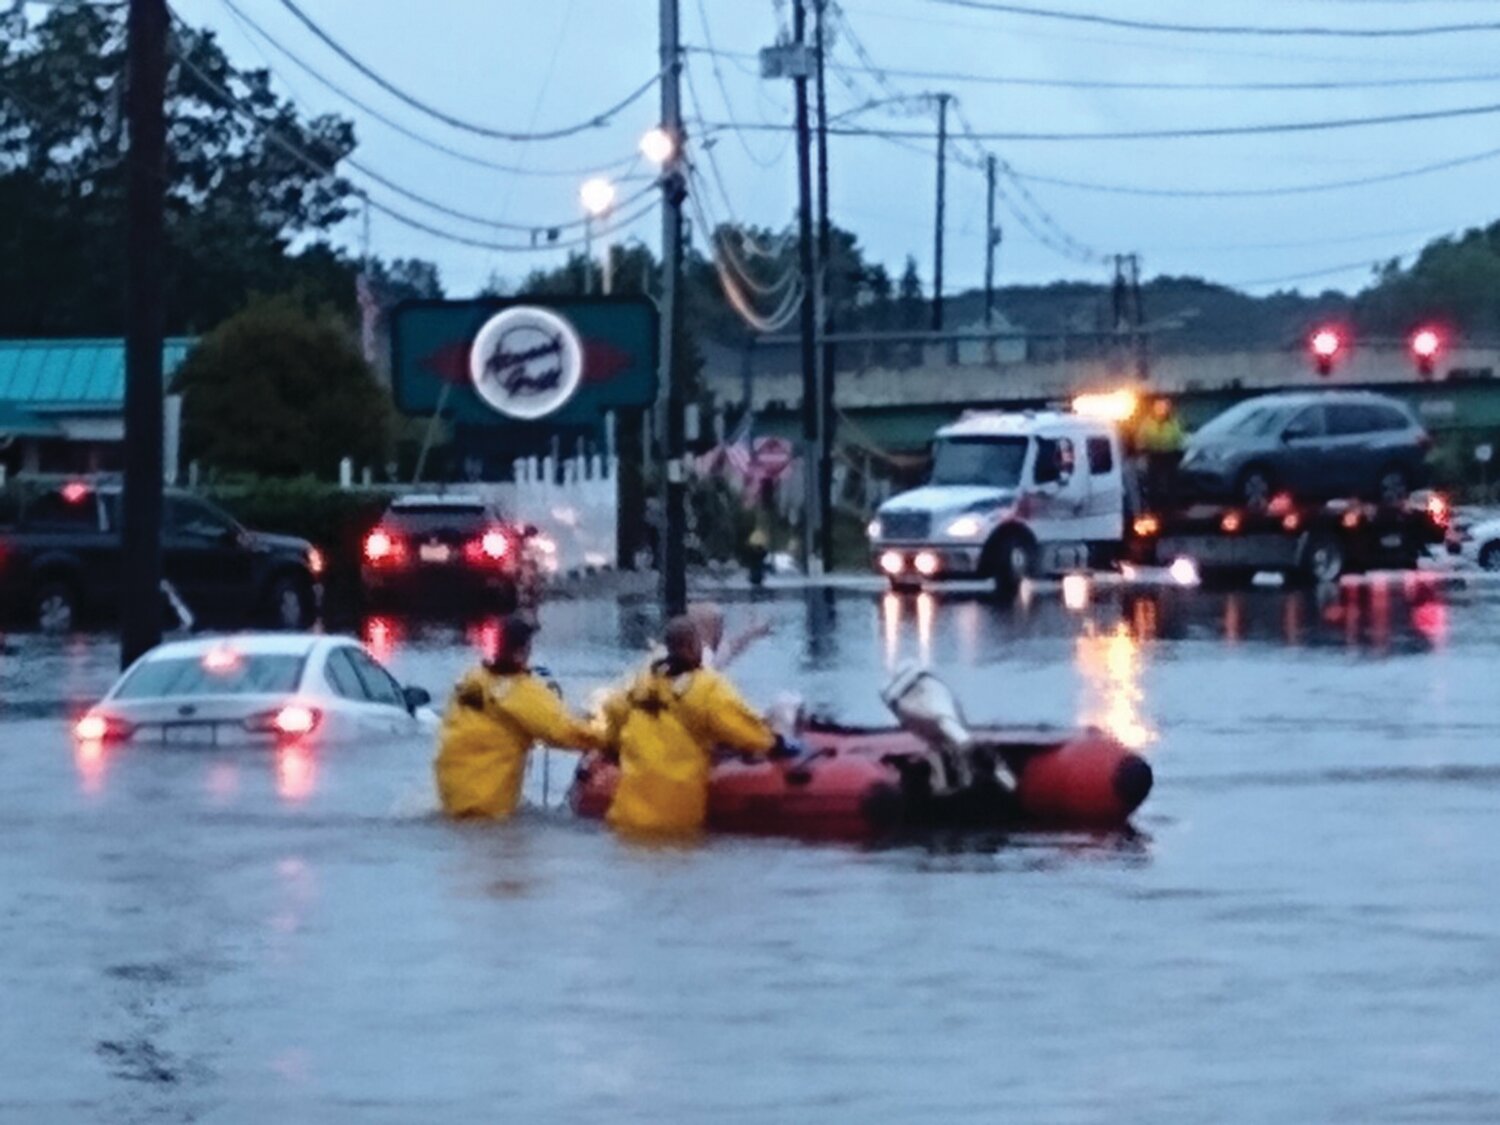 ATWOOD RIVER: A family was rescued by firefighters in a boat from their stuck vehicle in the middle of Atwood Avenue during Monday night’s widespread flooding in Johnston.